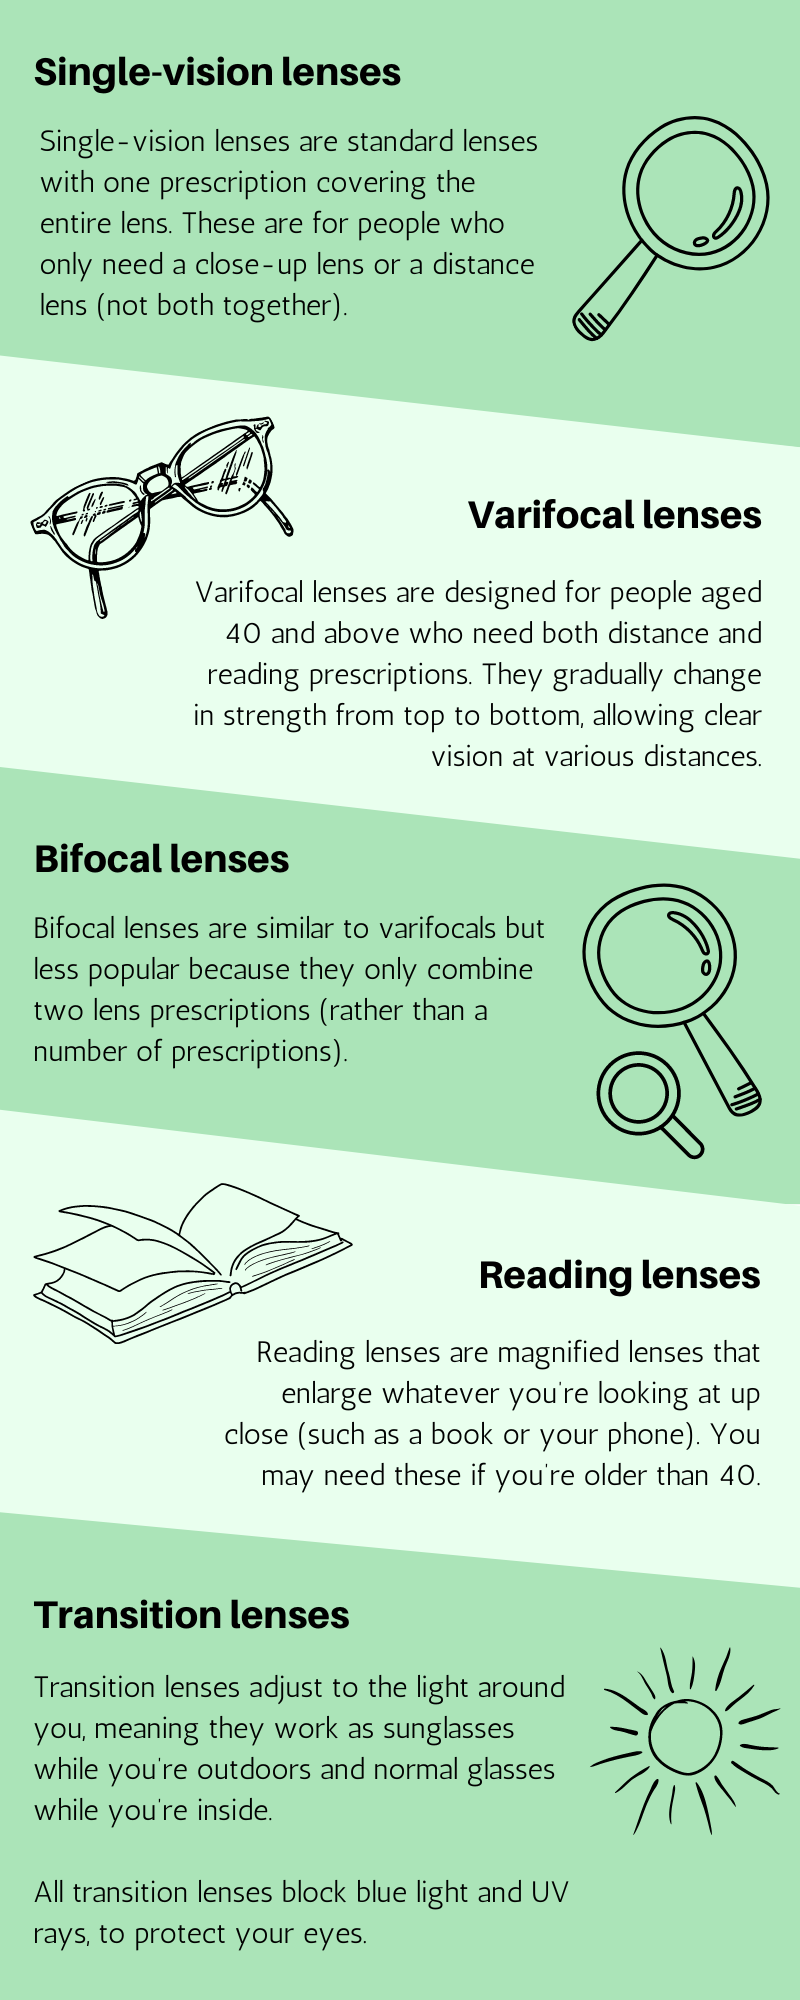 TopCashback diagram showing the different types of lenses for glasses